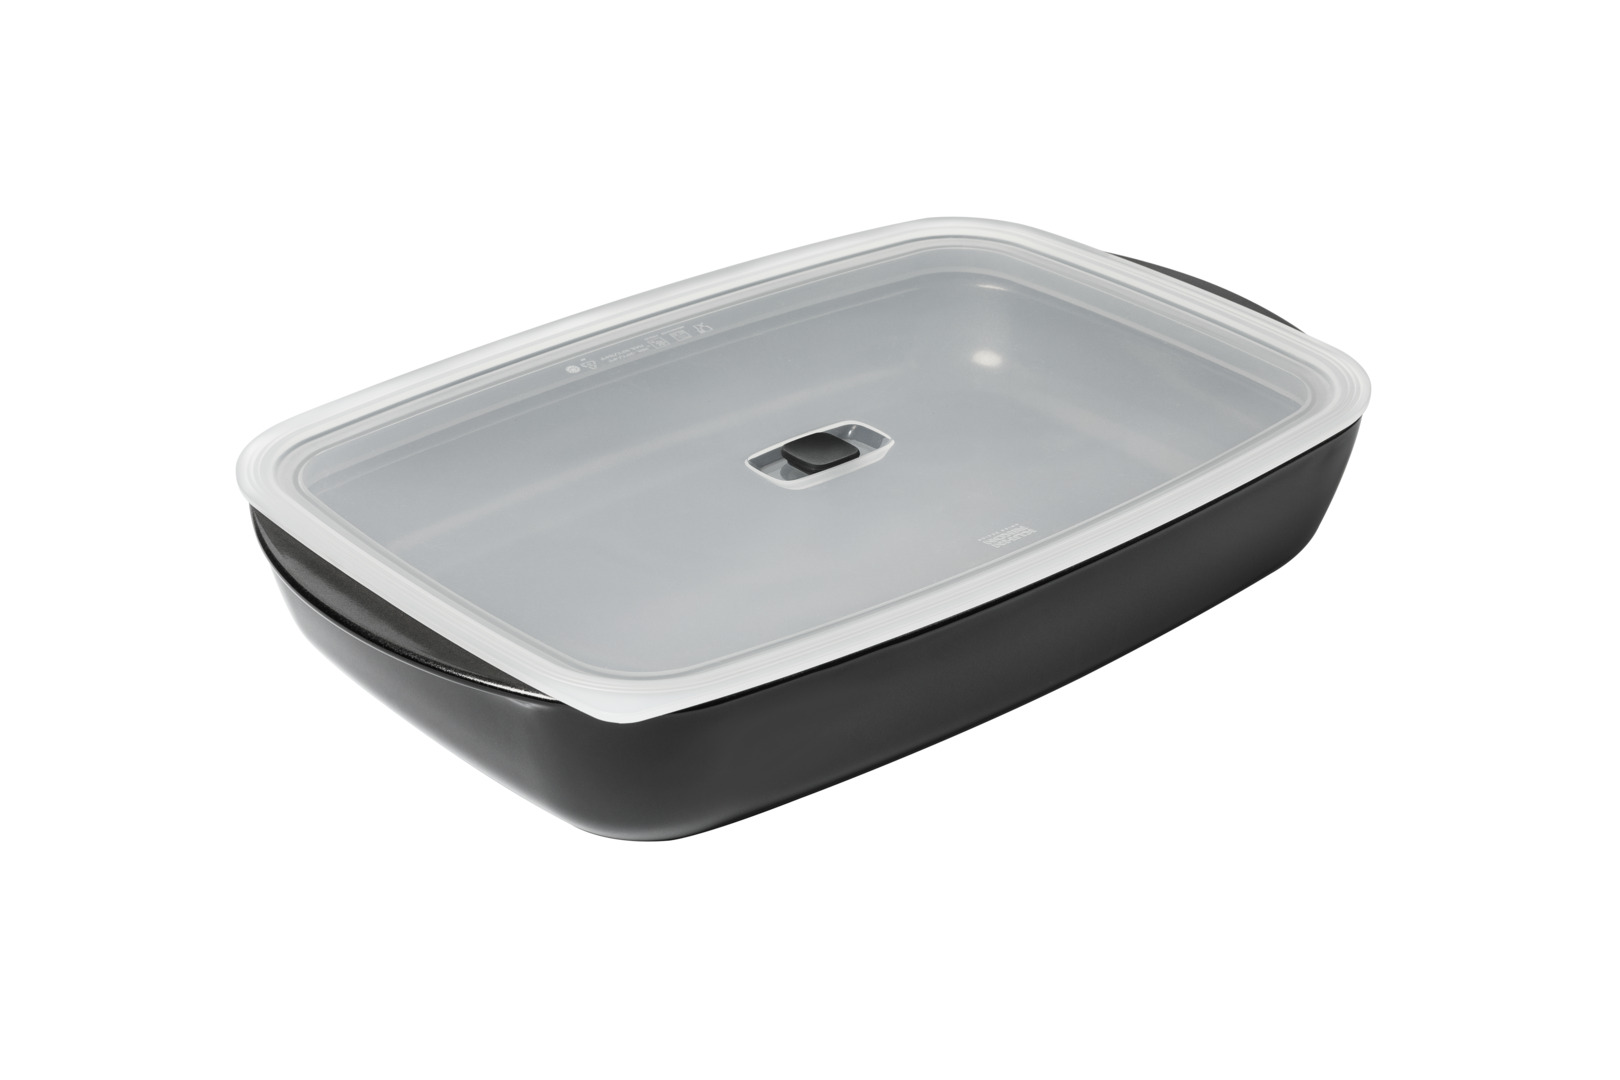 Kuhn Rikon - EASY GLASS Dish non-stick coated with Lid 2L / Medium